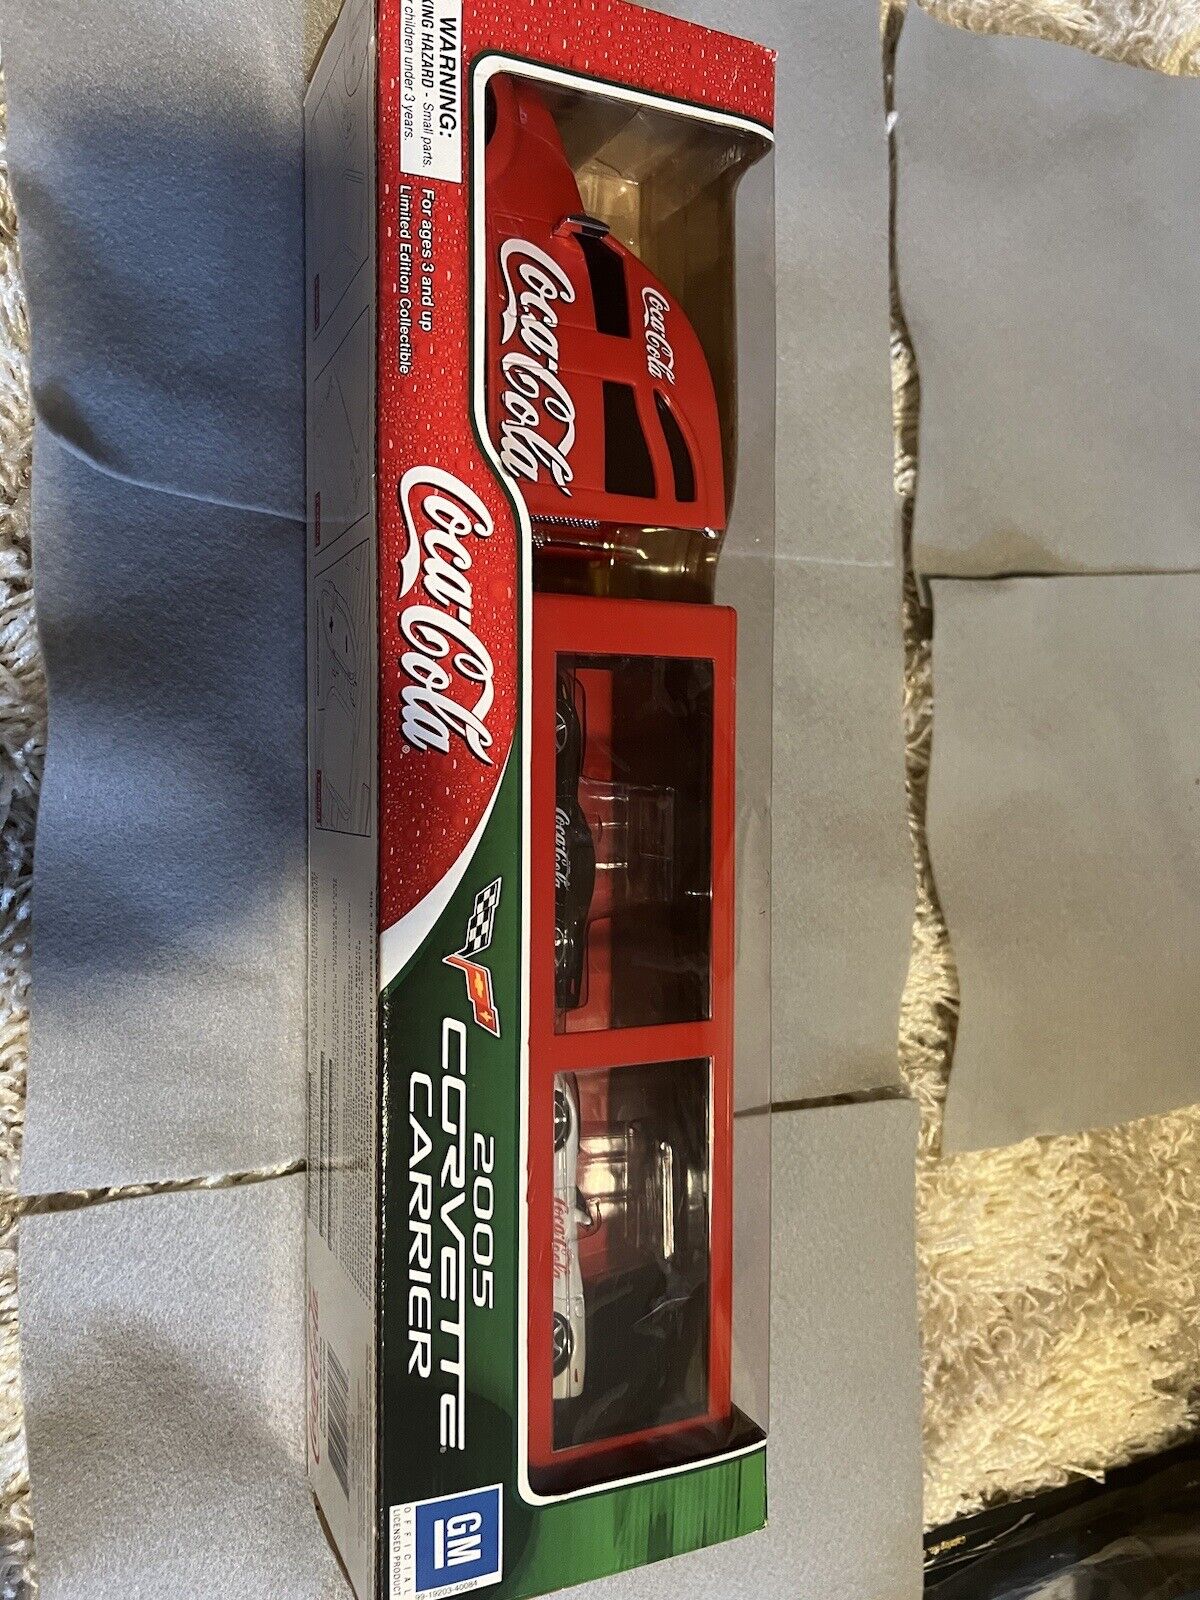 Coca-Cola 2005 Corvette Carrier officially licensed product. S407